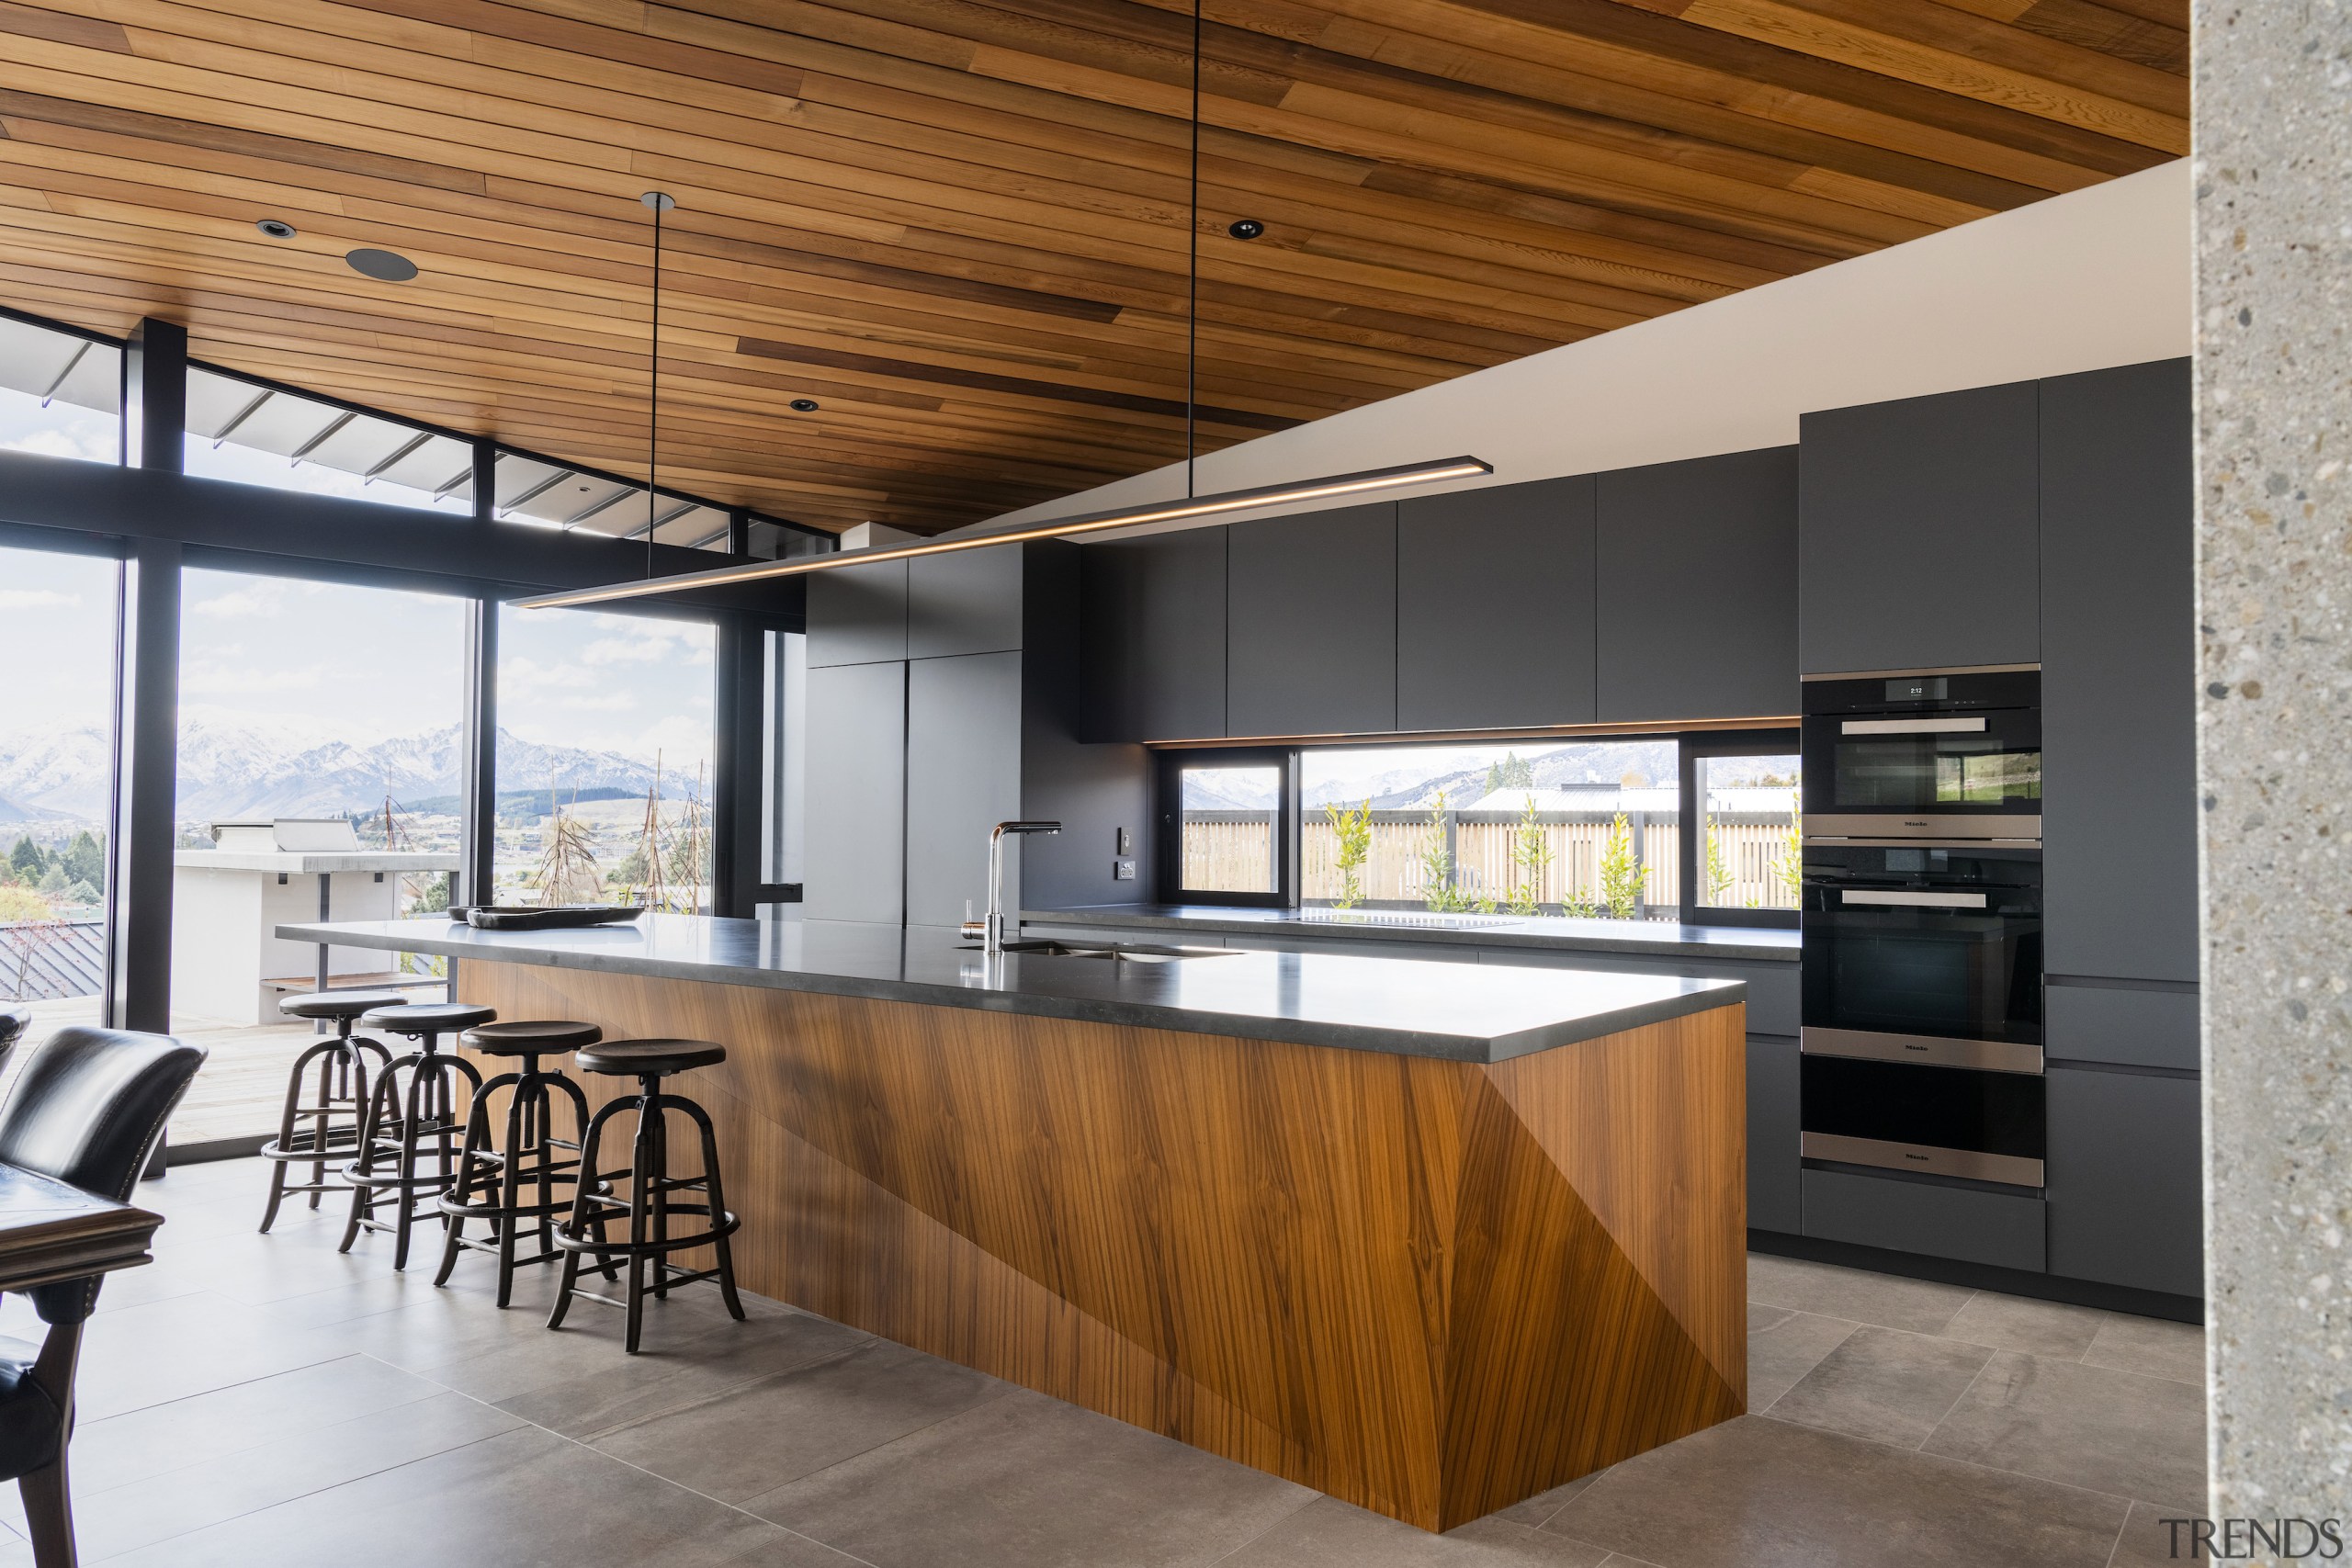 The faceted kitchen island echoes the rich timber 